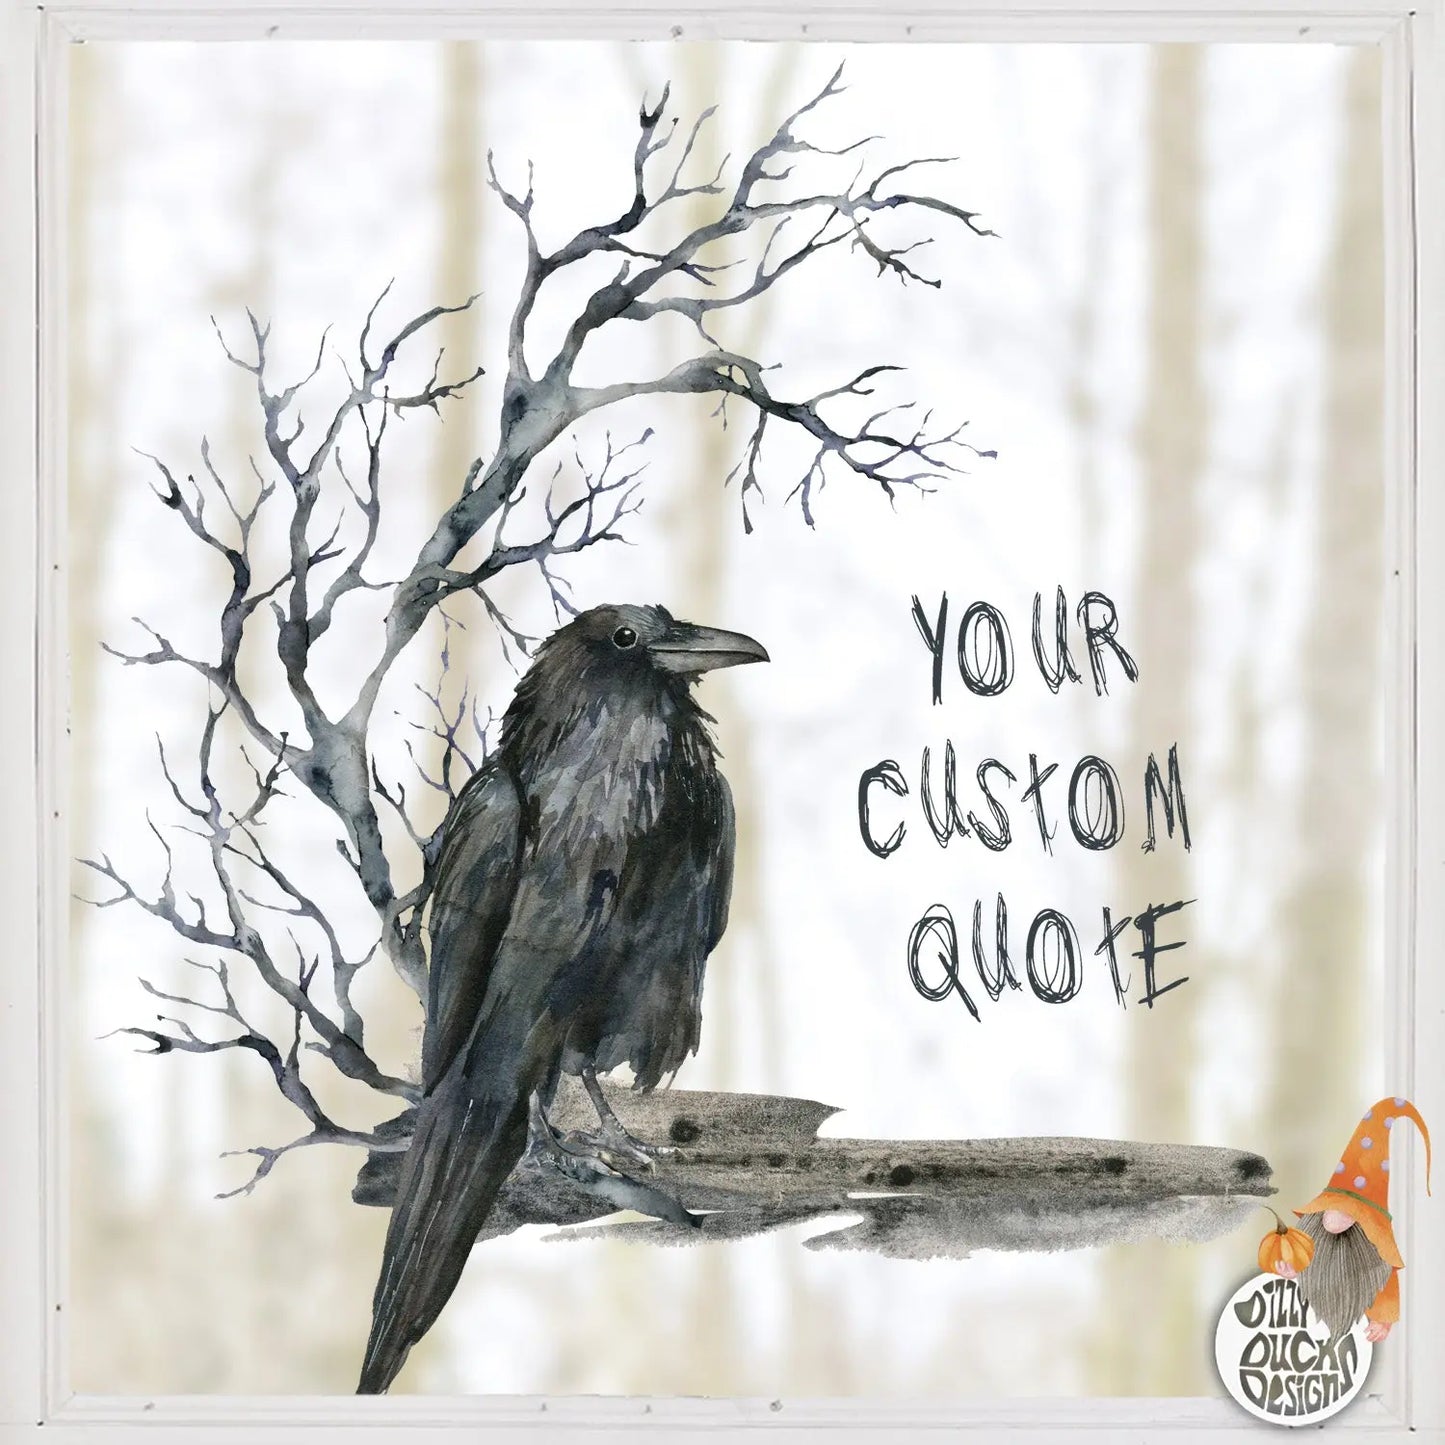 Window Decal Crow Quote Dizzy Duck Designs